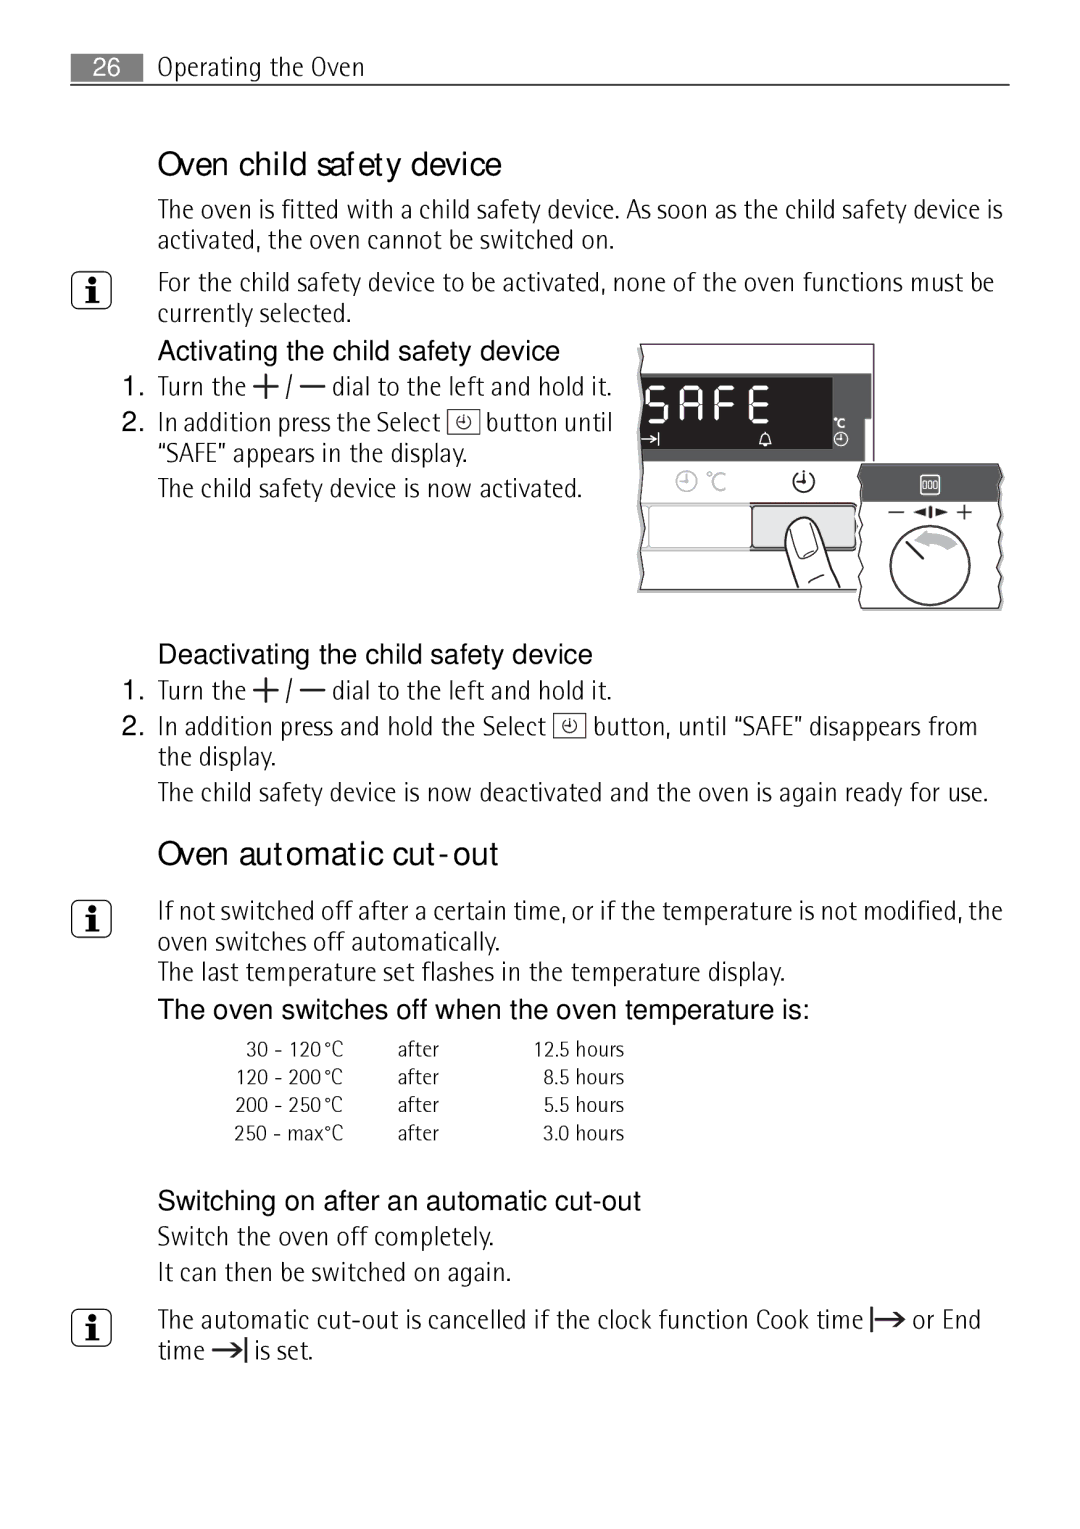 Electrolux B57415B, B57415A user manual Oven child safety device, Oven automatic cut-out 